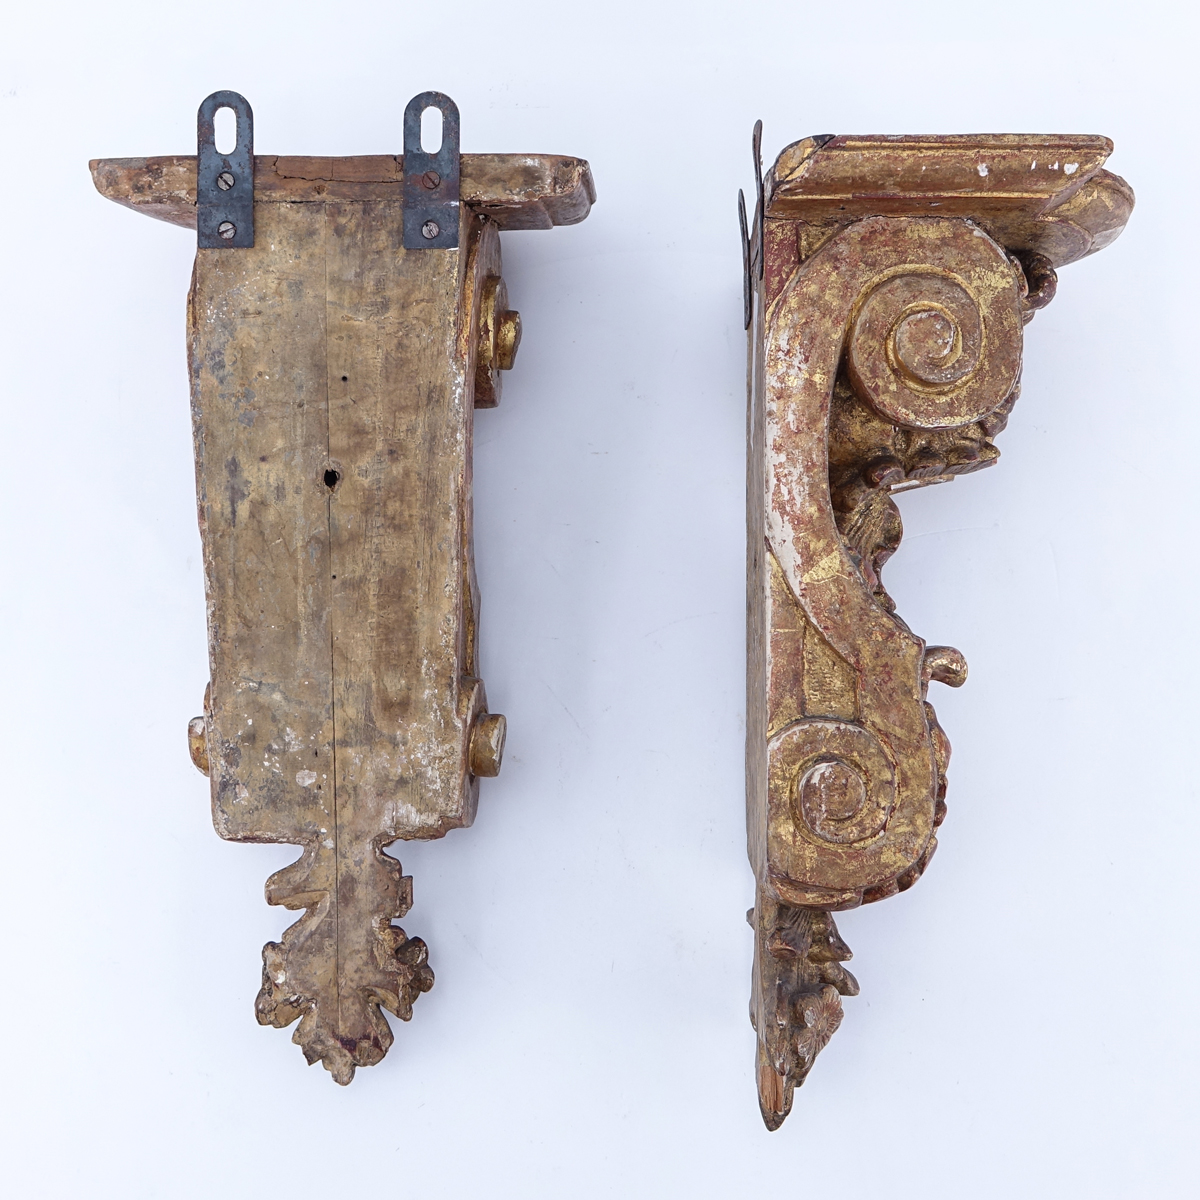 Pair Neoclassical Style Carved Gilt Wood Wall Brackets. Unsigned.